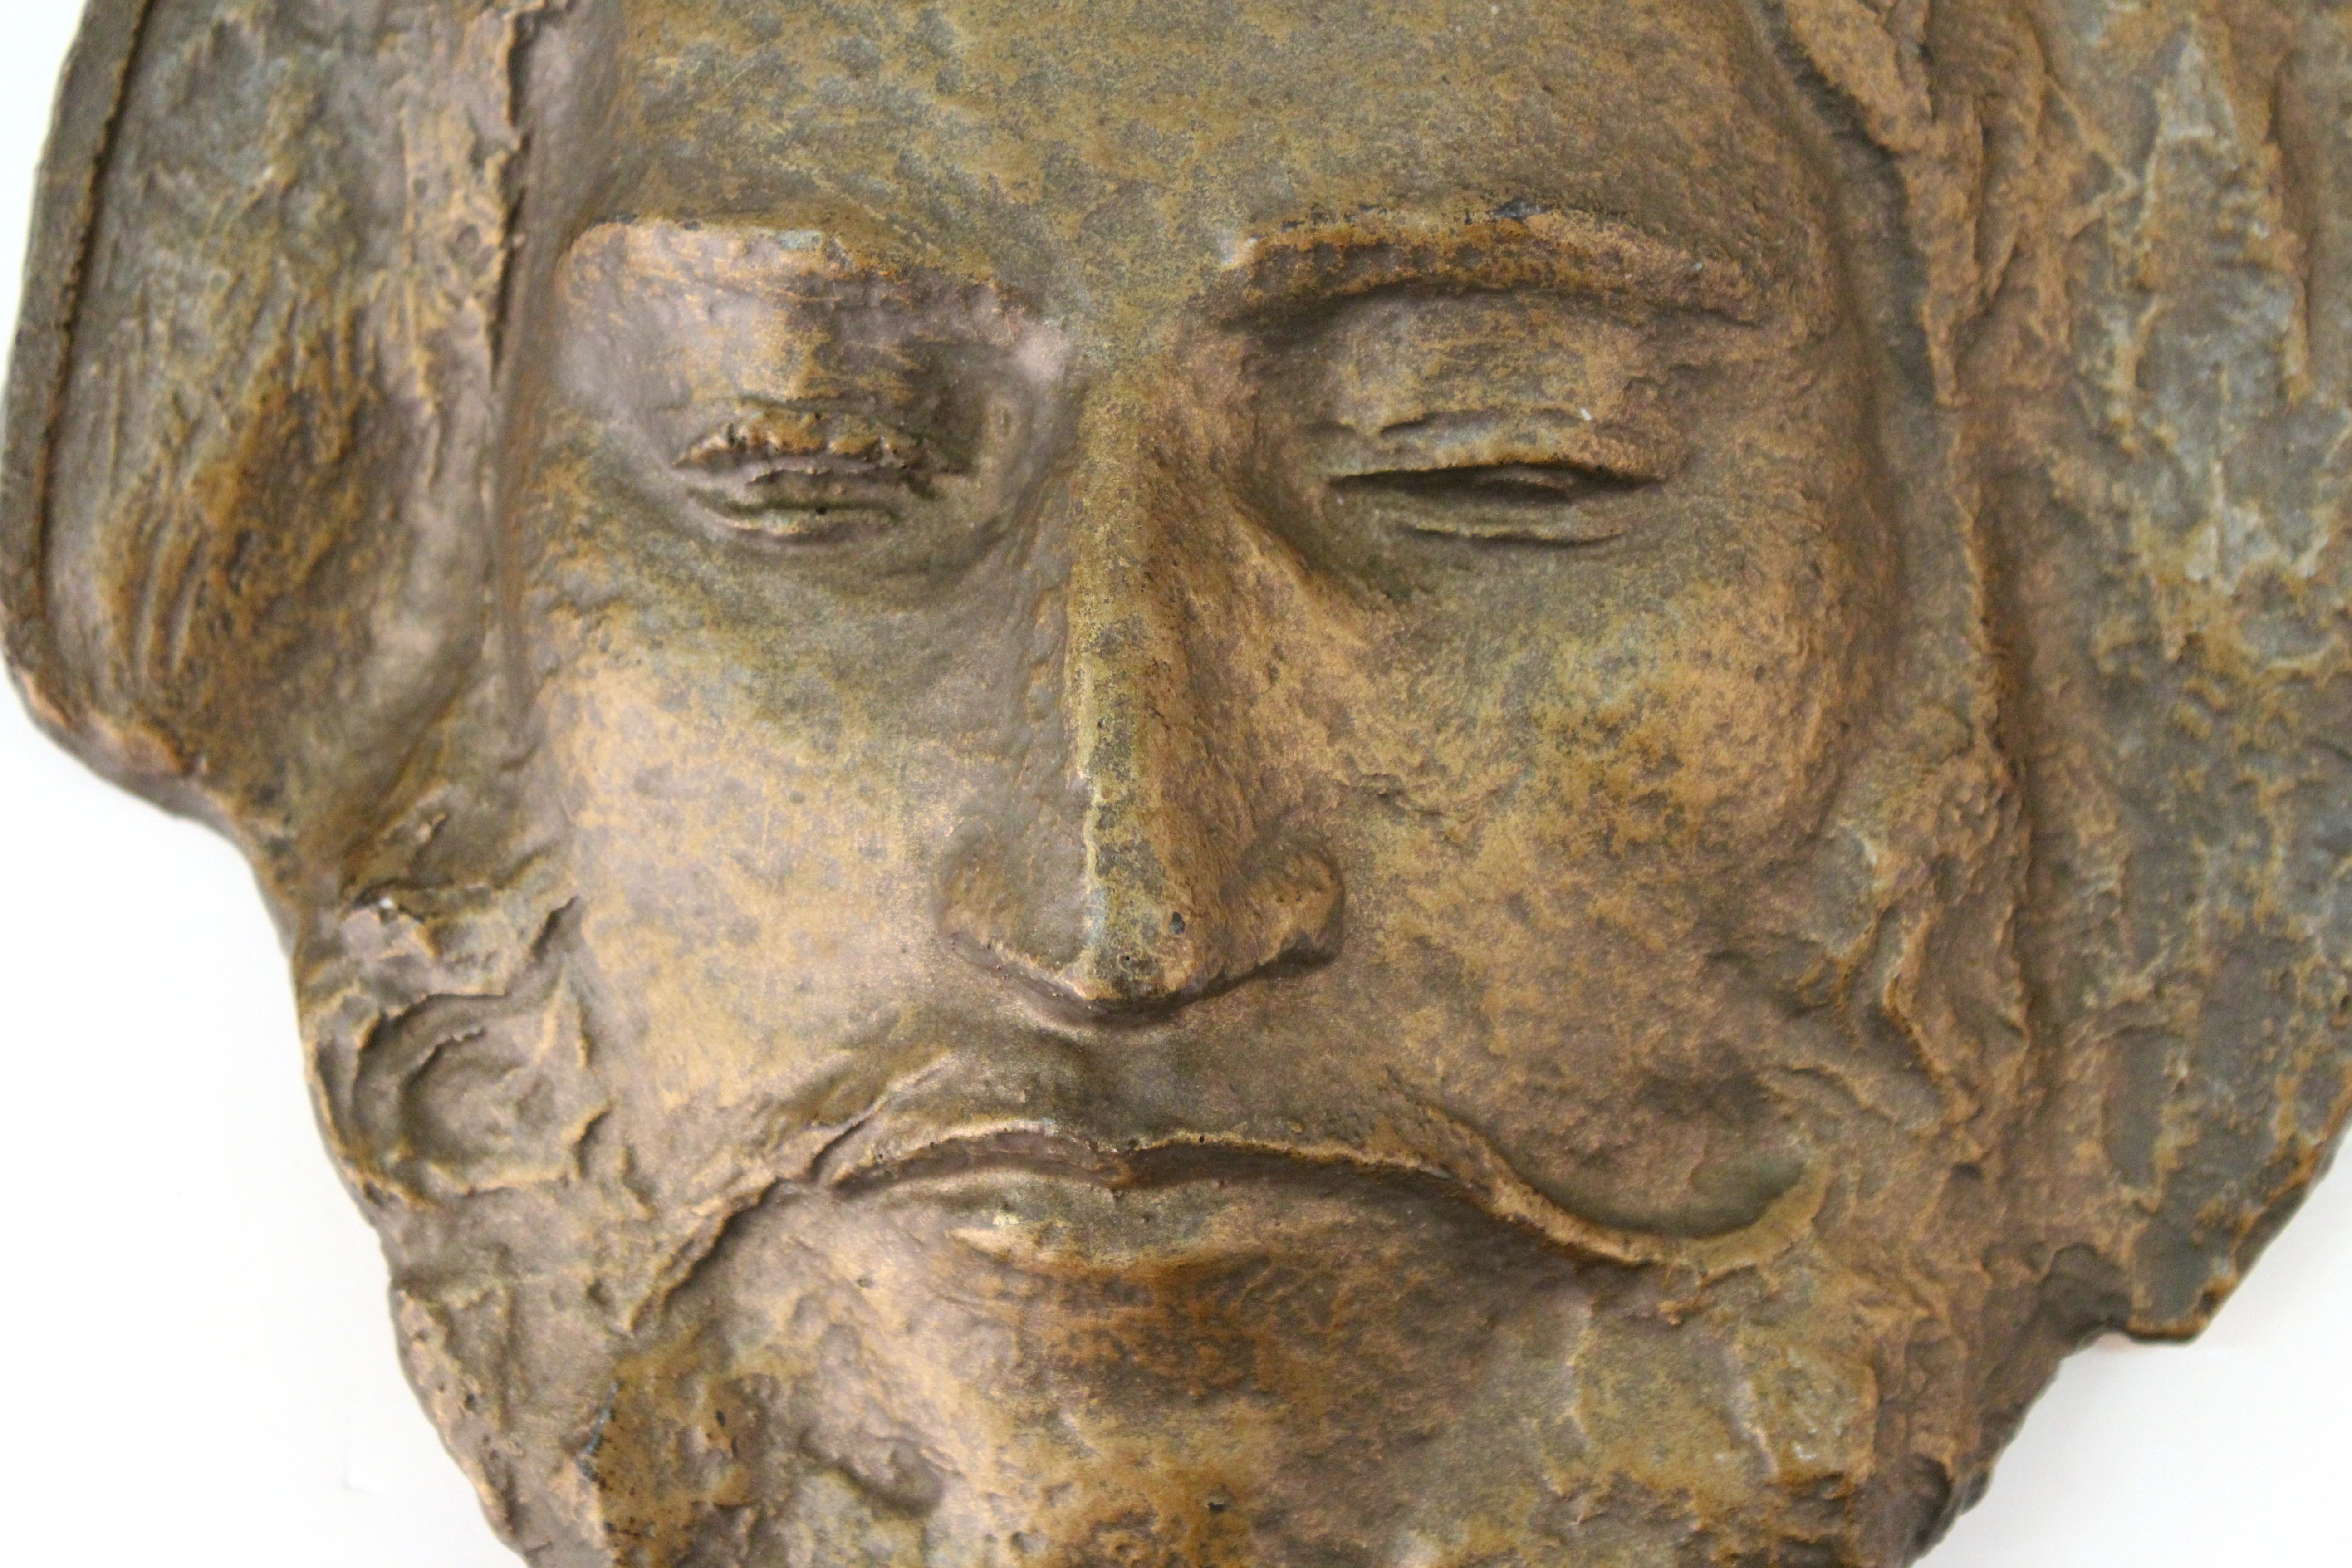 Classical style sculpted face of Paul Gauguin, in bronzed plaster. The piece has a mount on the back to hang on a wall and has an artists mark on the bottom edge. In good vintage condition with age-appropriate patina.